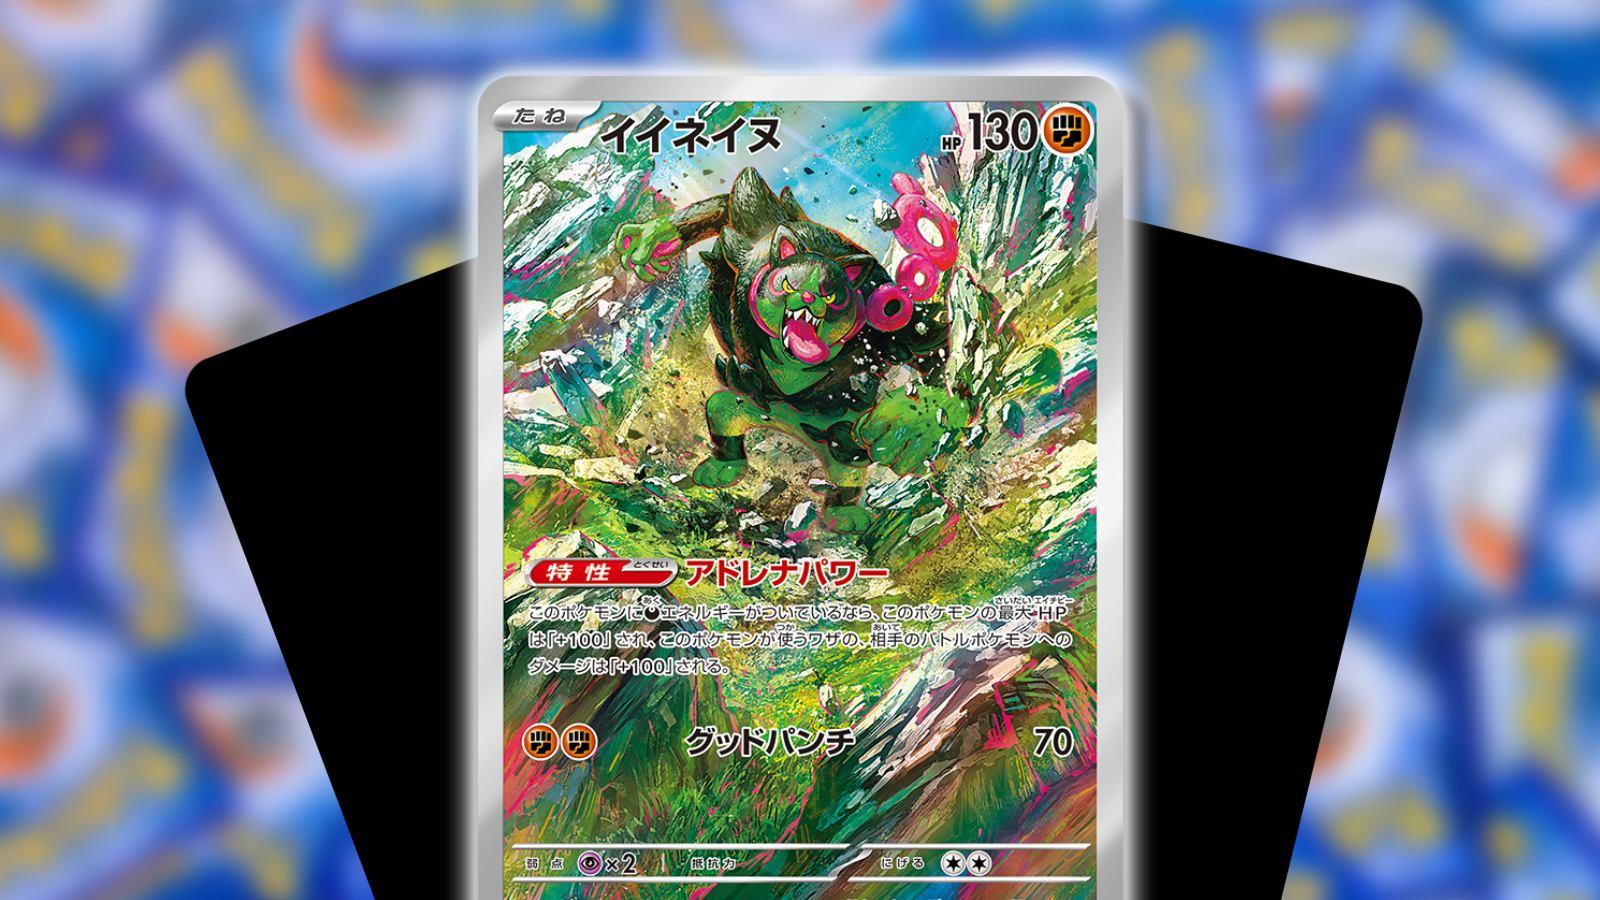 A card featuring the Pokemon Okidogi is shown against a blurred background